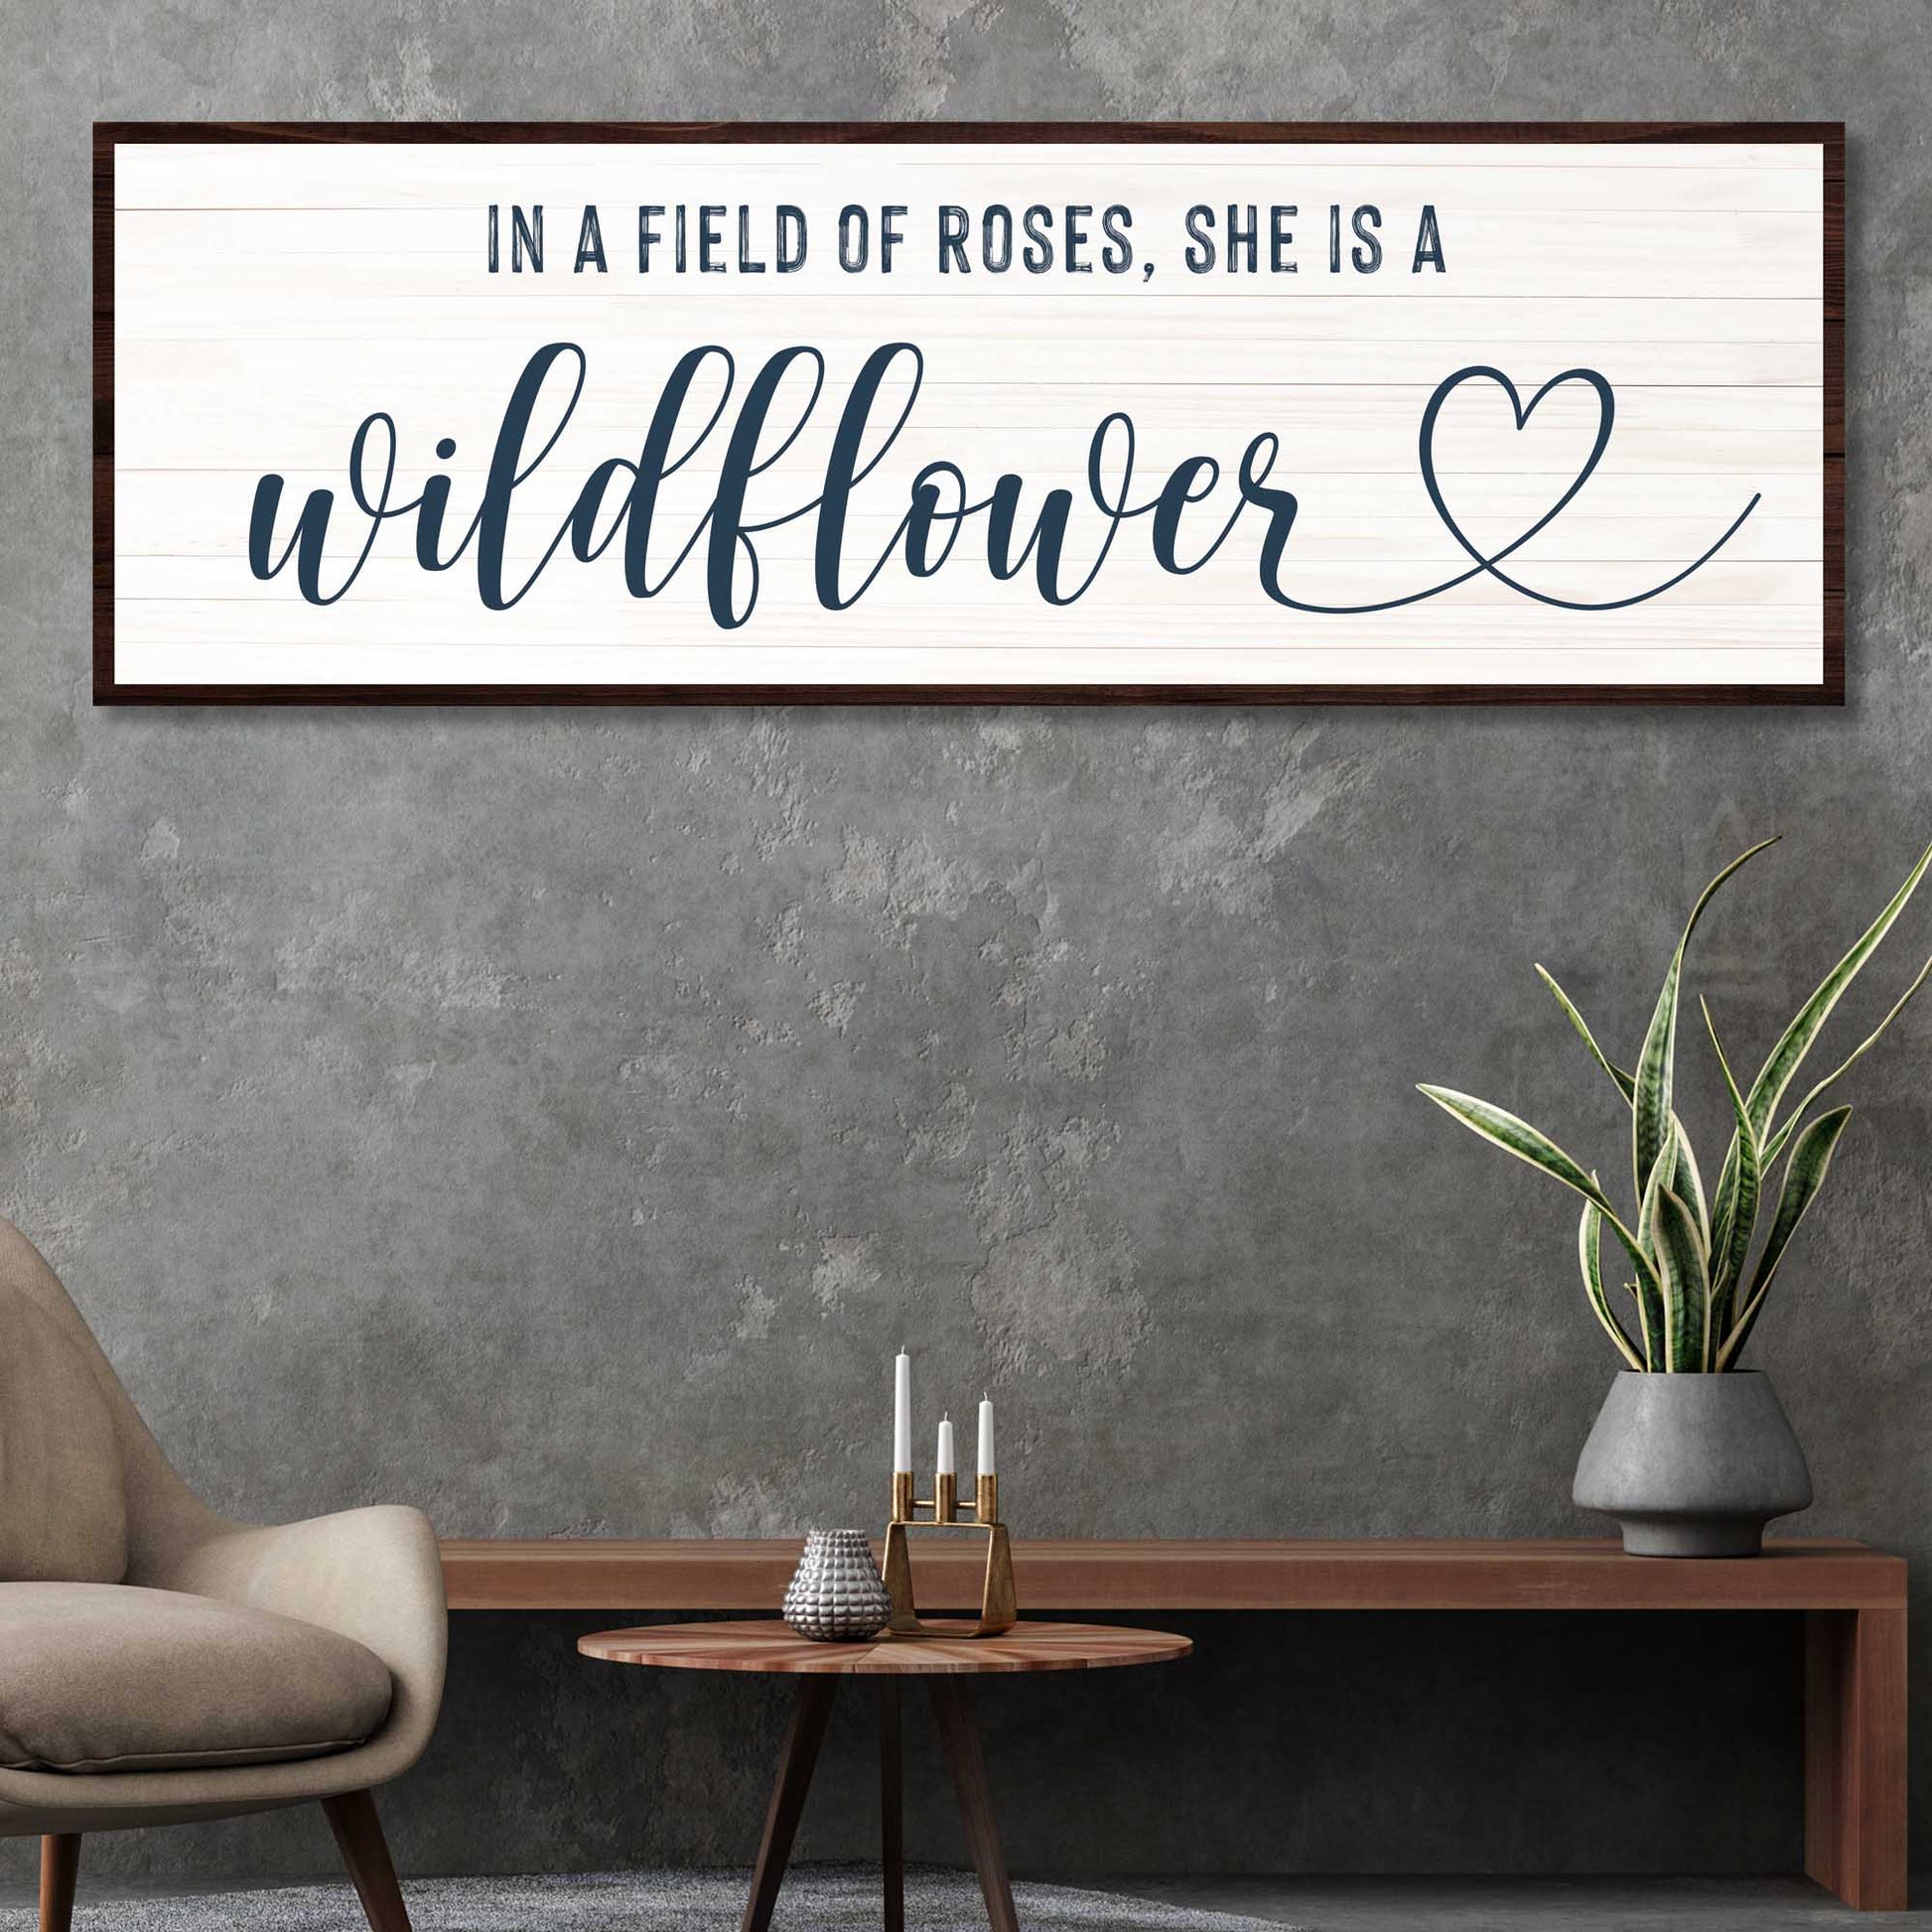 She is a Wildflower Sign II - Image by Tailored Canvases